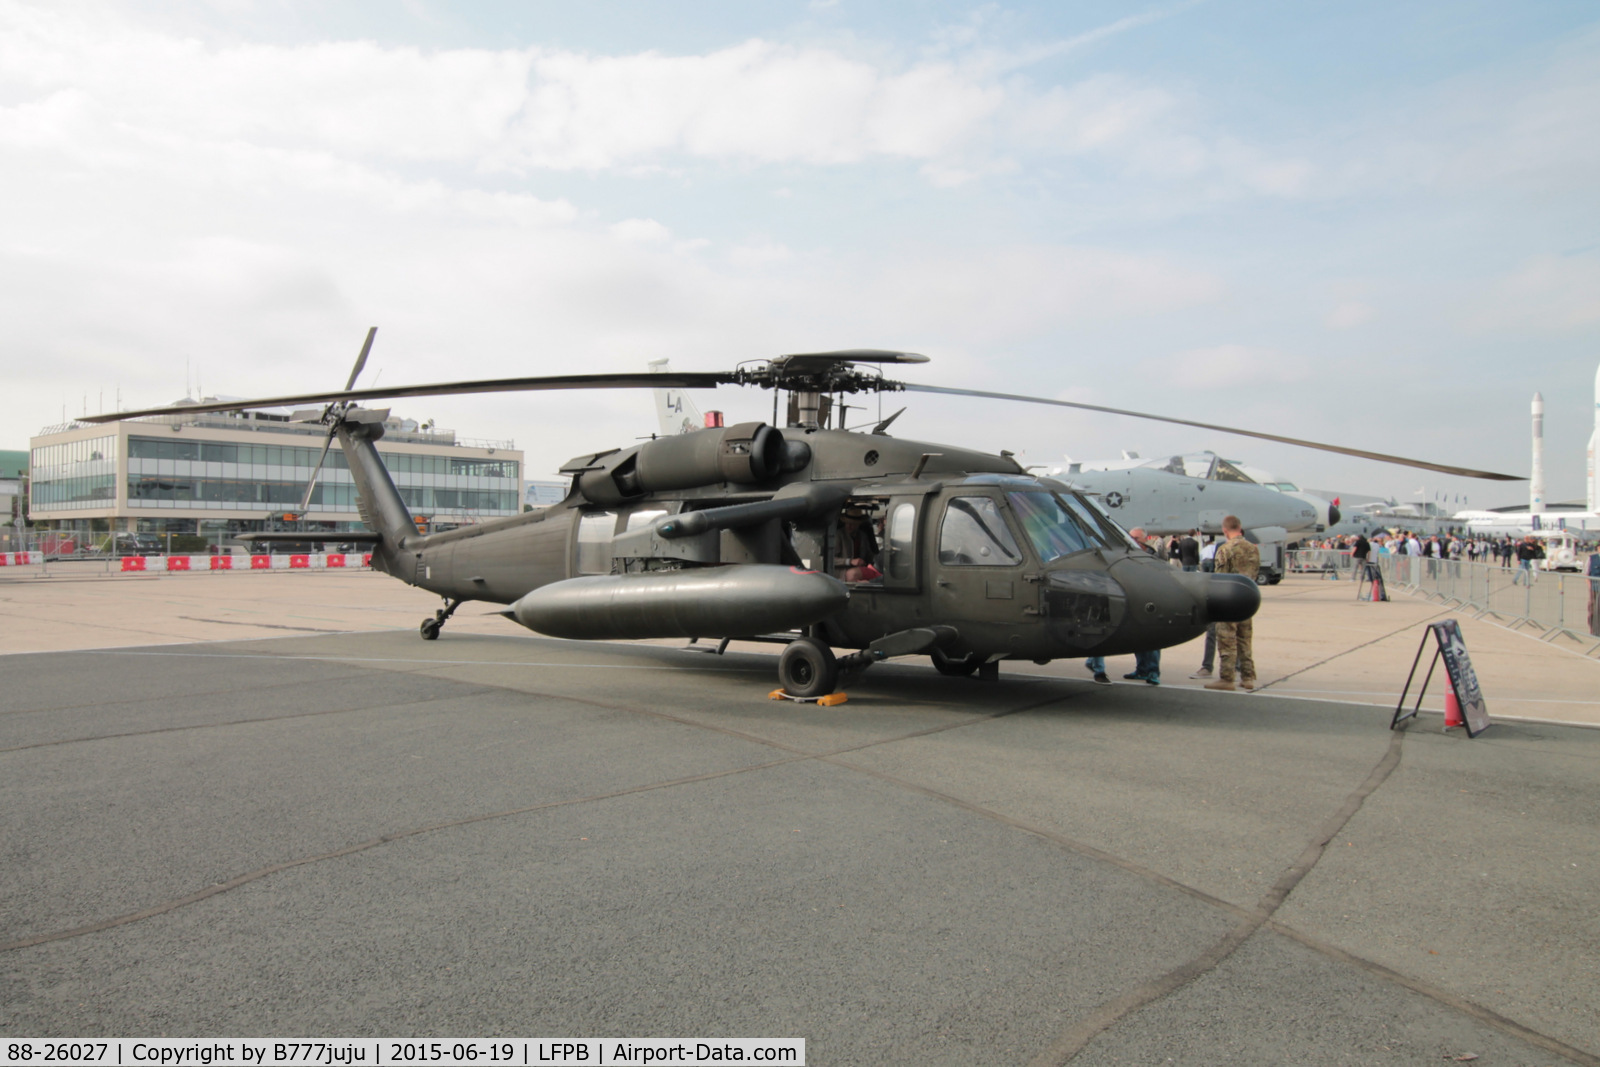 88-26027, 1988 Sikorsky UH-60A Black Hawk C/N 70-1236, at Le Bourget for SIAE 2015